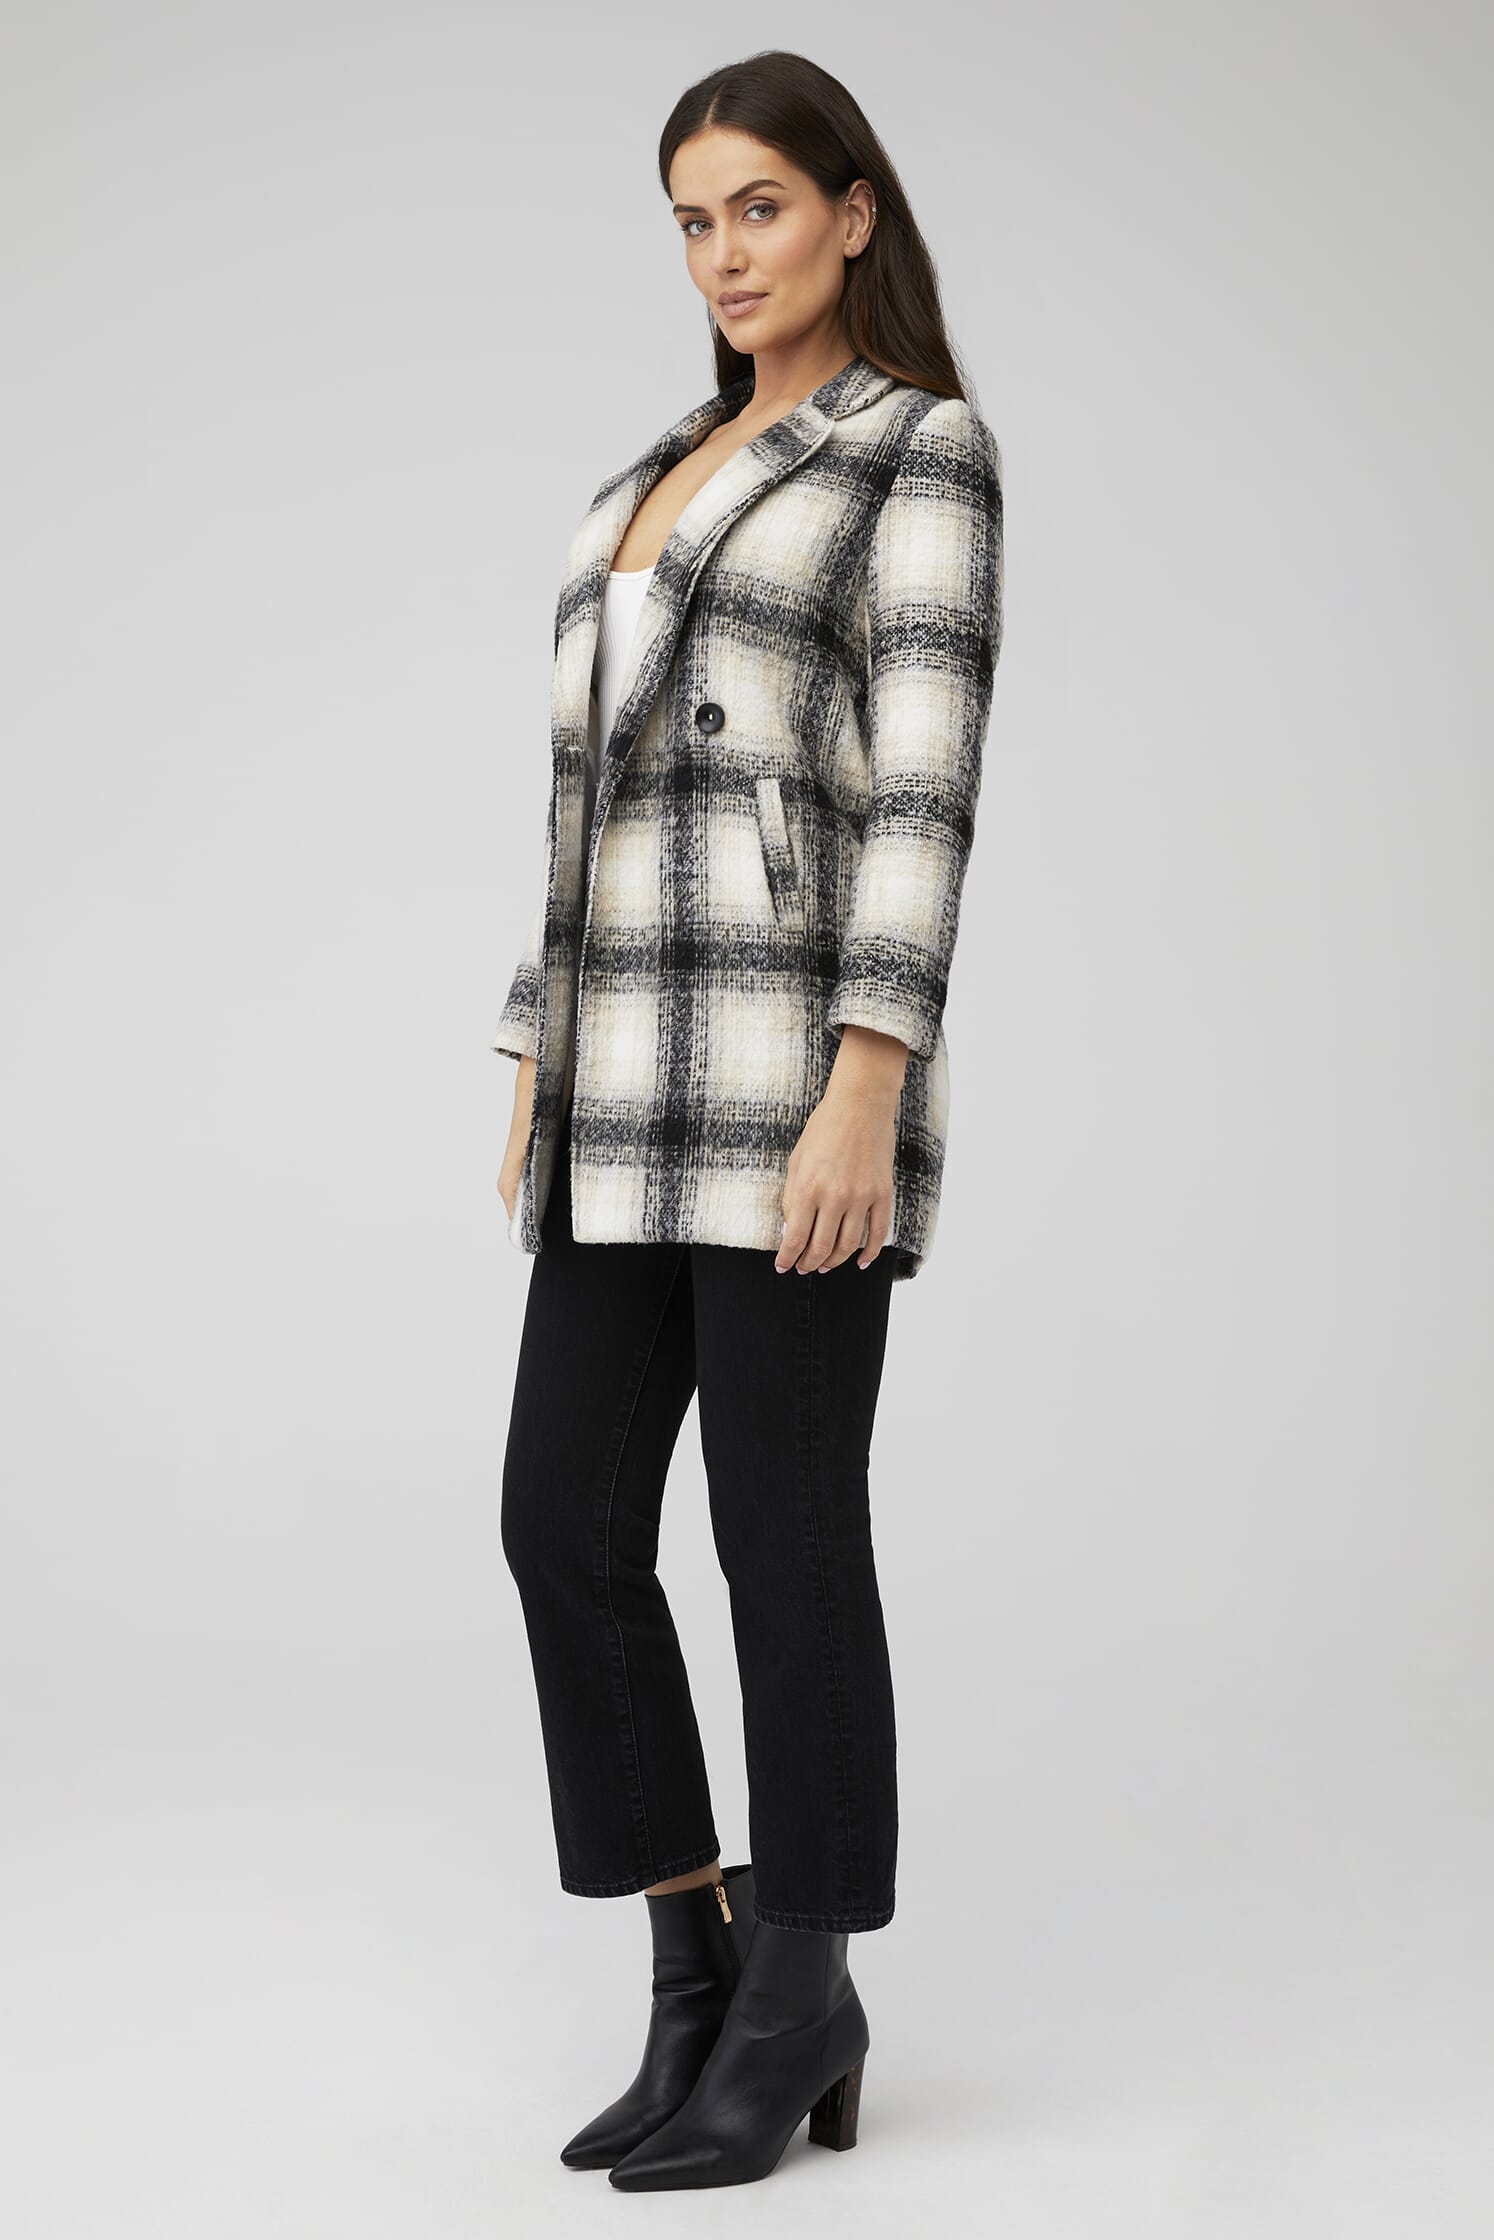 LBLC THE LABEL | Becca Jacket in Plaid| FashionPass